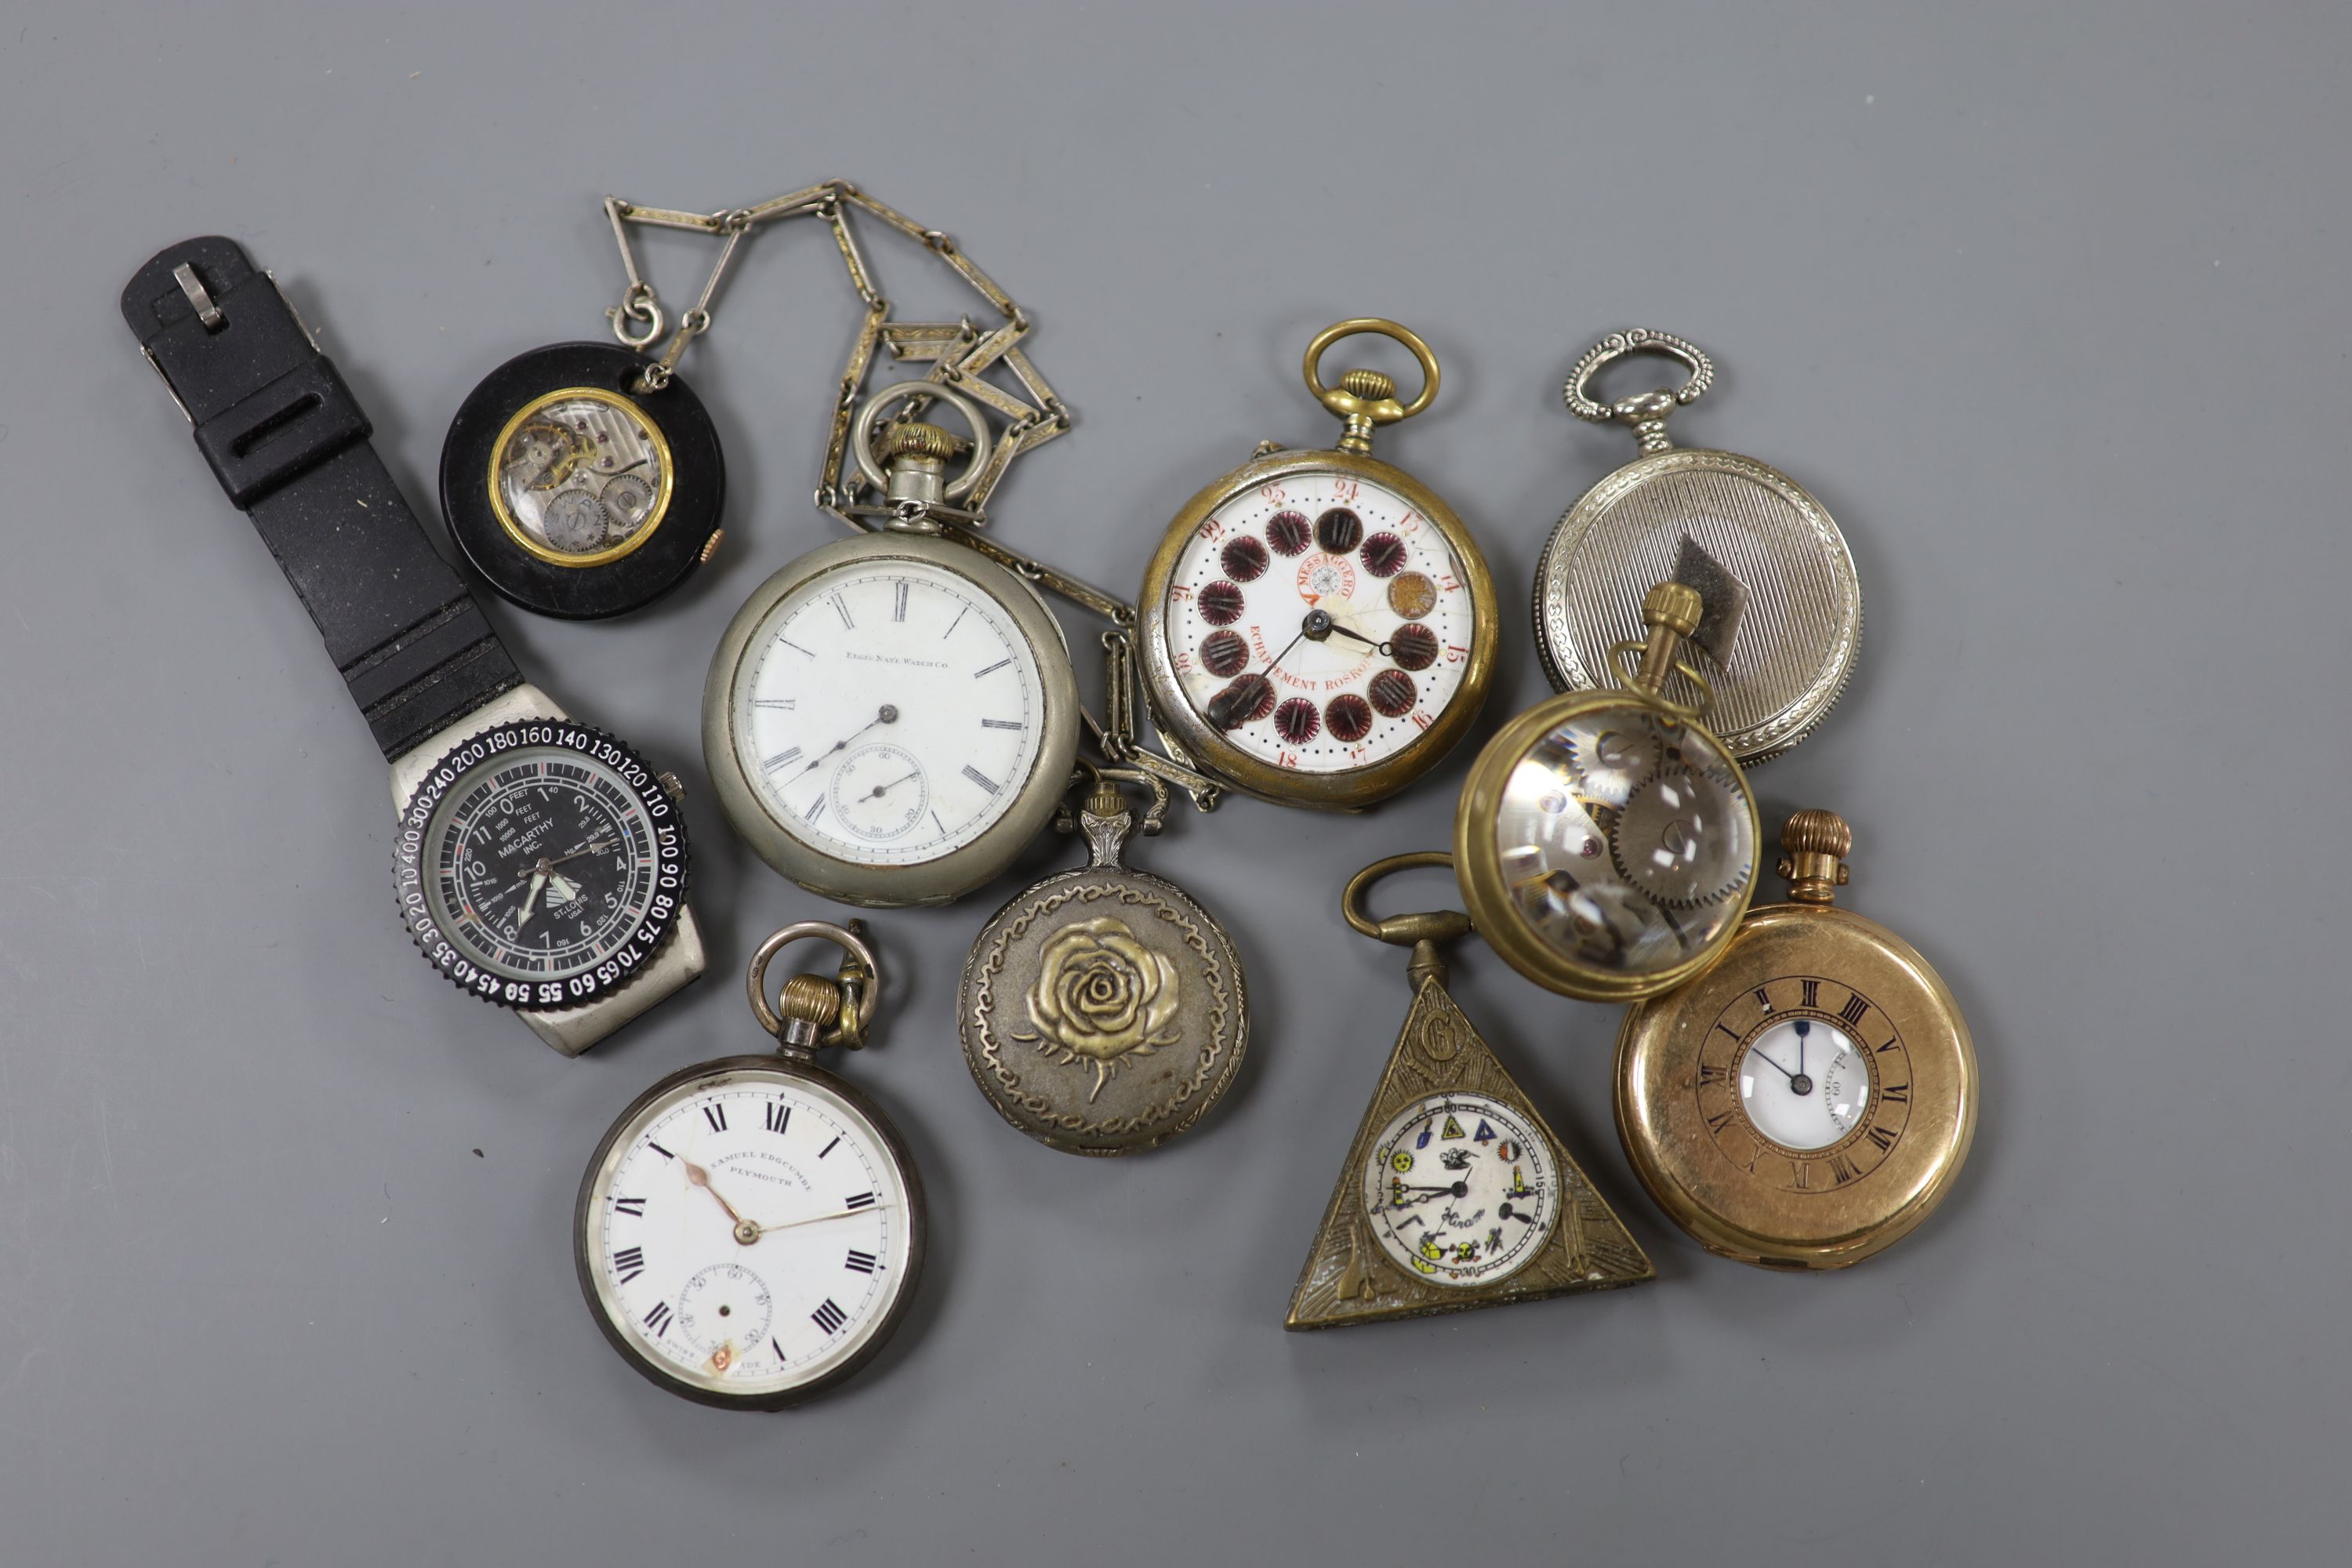 A small group of assorted pocket watches etc including a silver open face pocket watch and a globe watch.